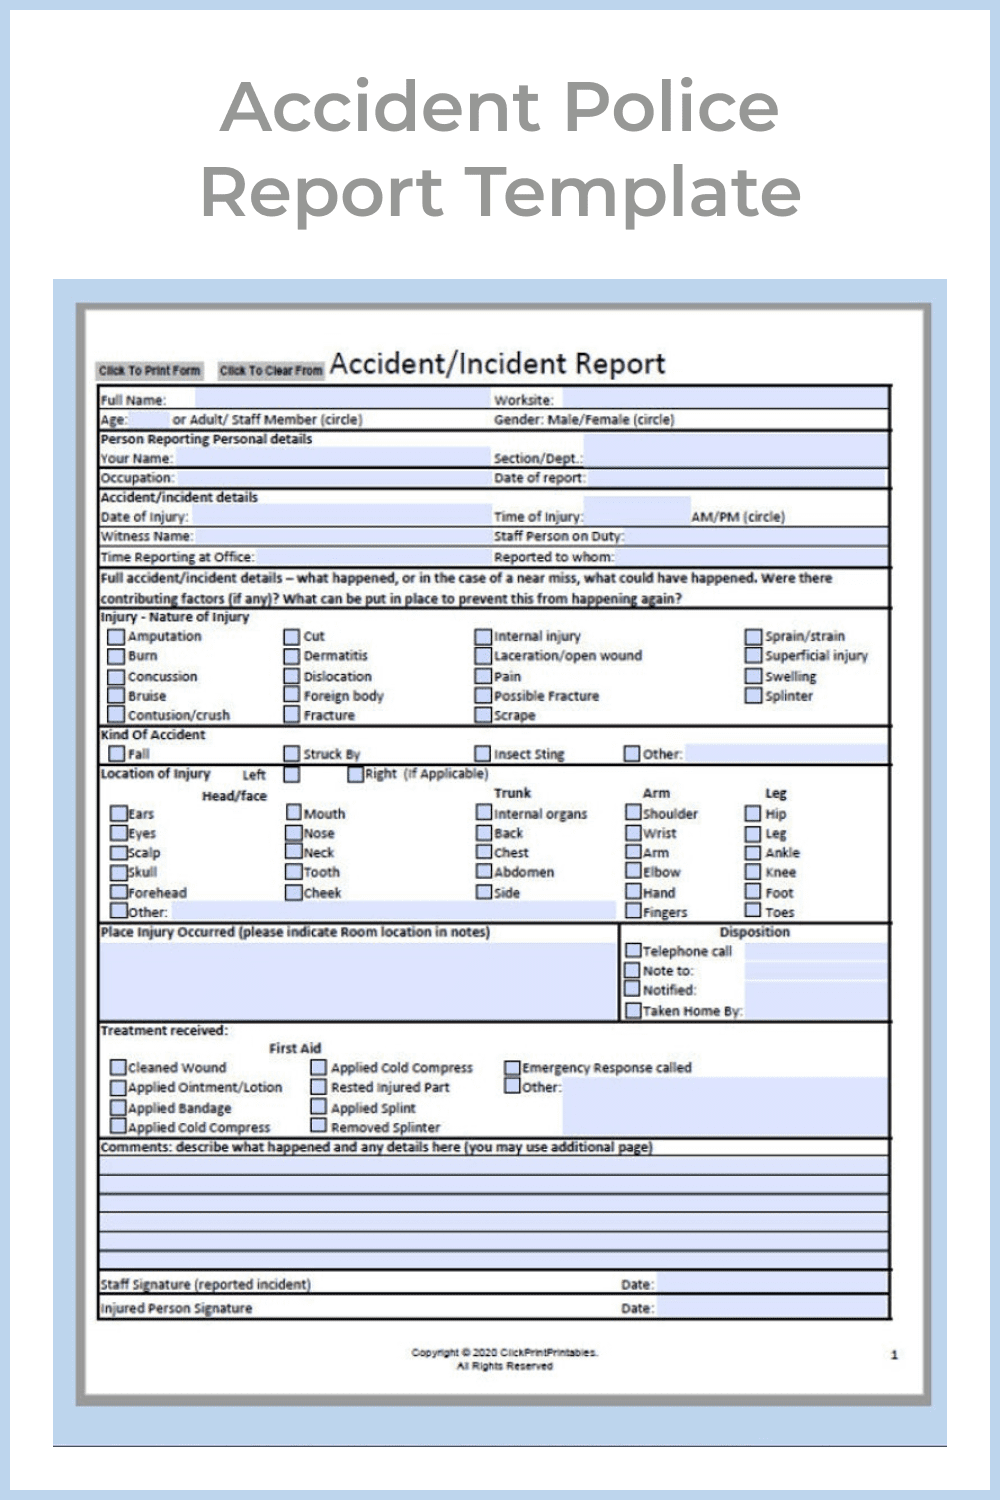 Accident Police Report Template.